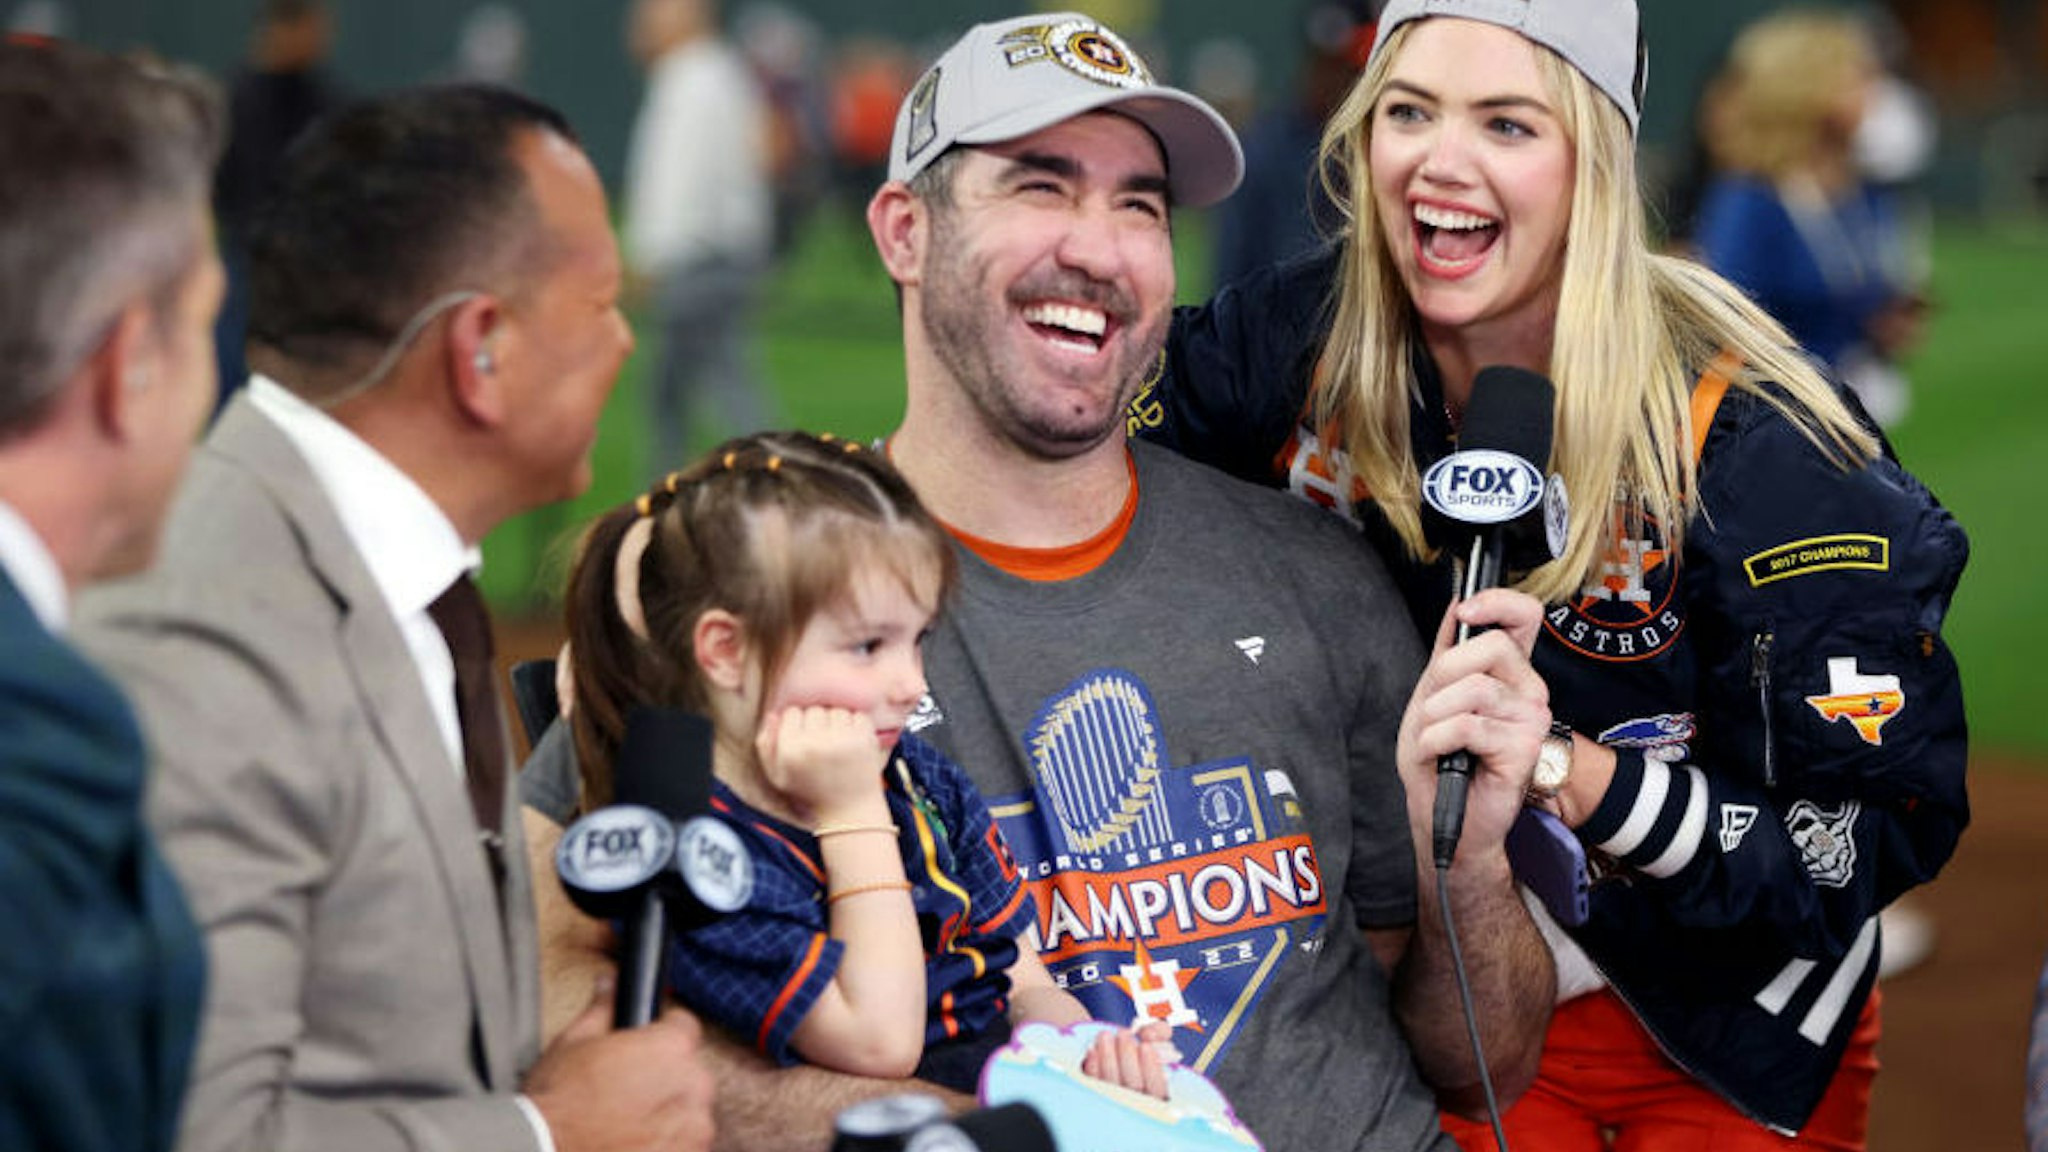 Justin Verlander #35 of the Houston Astros and Kate Upton are seen on the Fox set after the Astros defeated the Philadelphia Phillies in Game 6 of the 2022 World Series at Minute Maid Park on Saturday, November 5, 2022 in Houston, Texas.